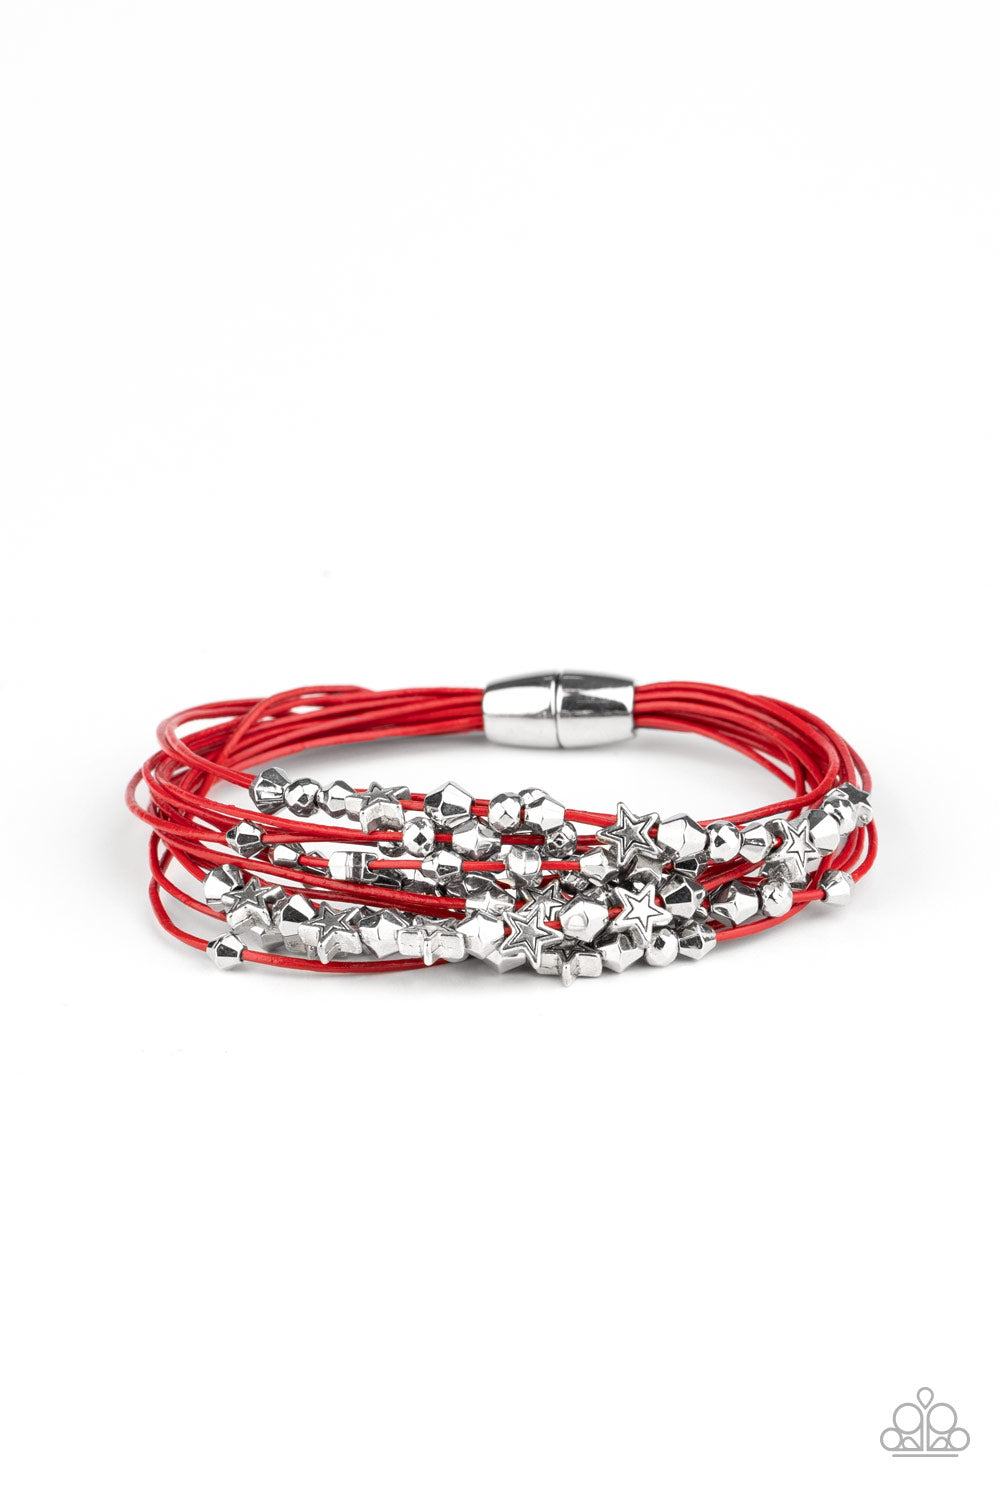 STAR-STUDDED AFFAIR - Paparazzi - A collection of faceted silver beads and silver star charms slides along red cords that layer across the wrist of a colorful look. Features a magnetic closure.